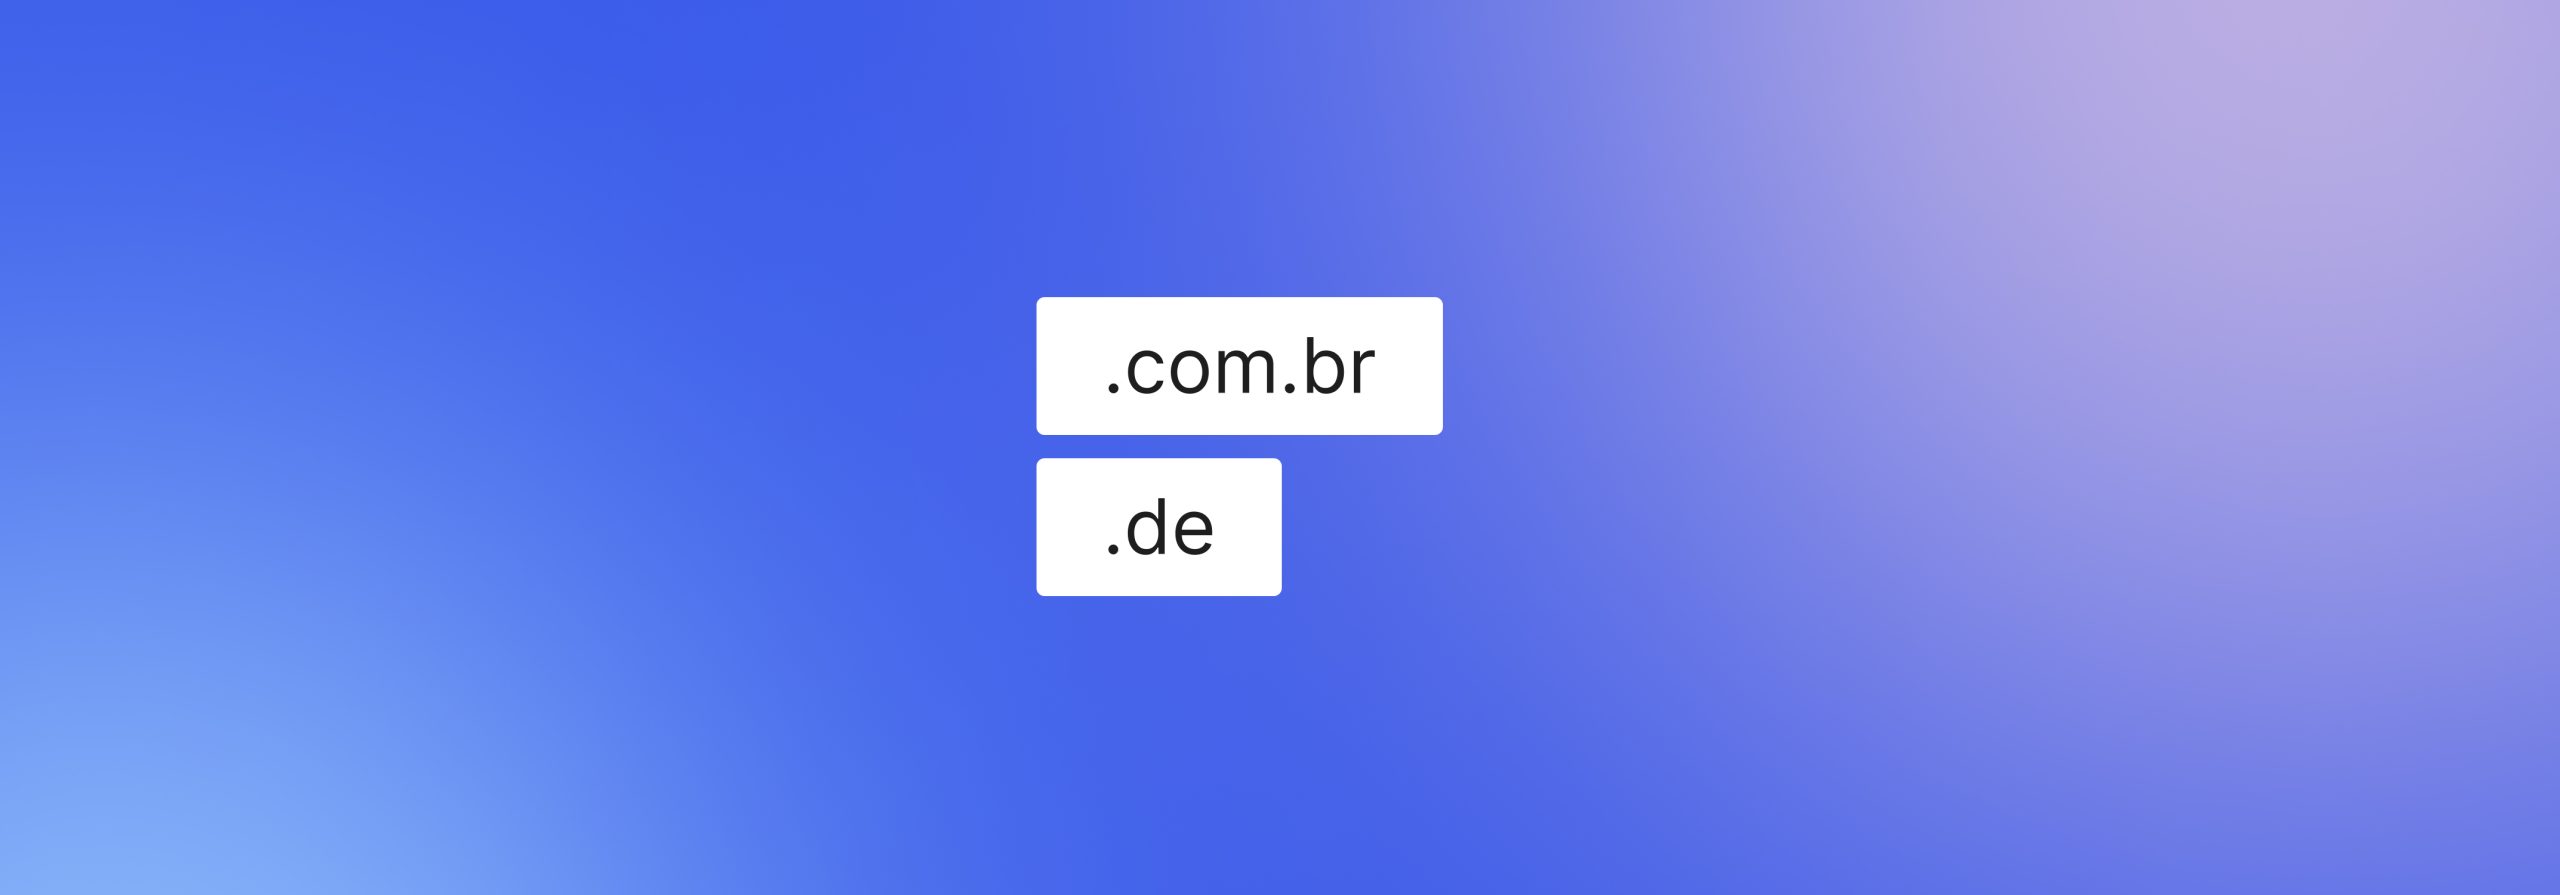 official-country-code-domains-for-combr-and-de-now-available-on-wordpress.com